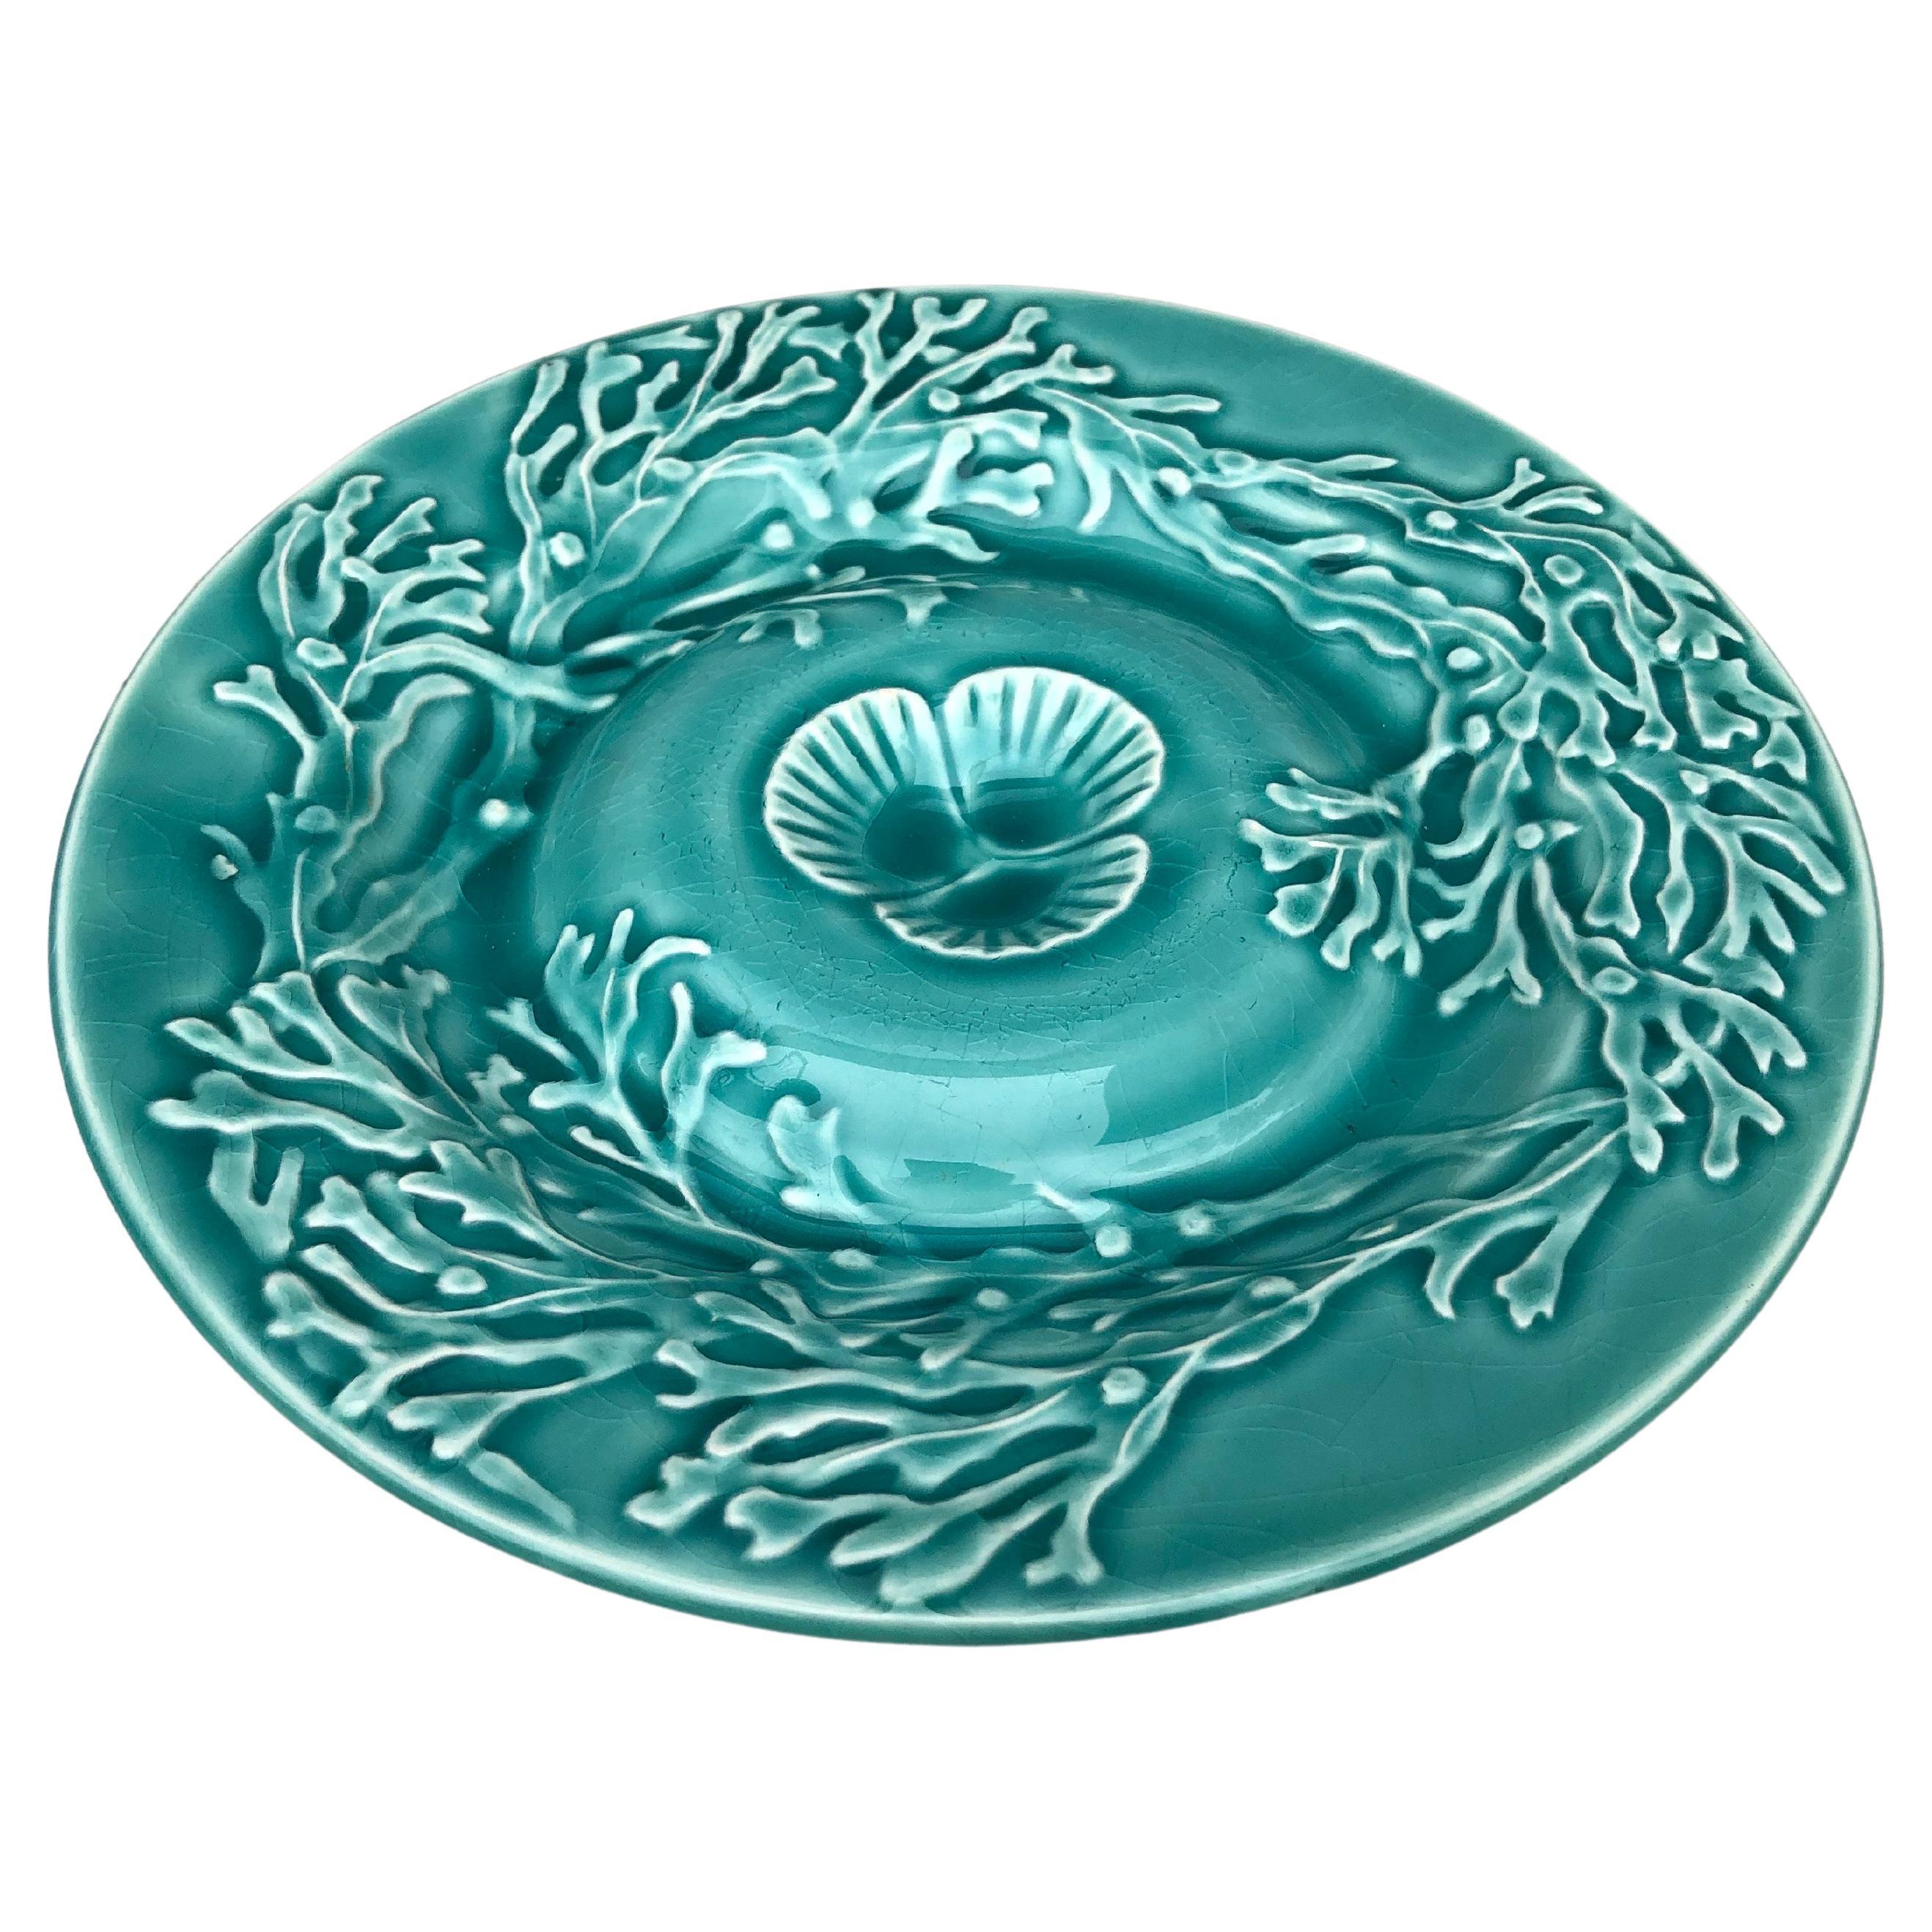 Majolica aqua turquoise shell plate with seaweeds signed Gien, circa 1930.